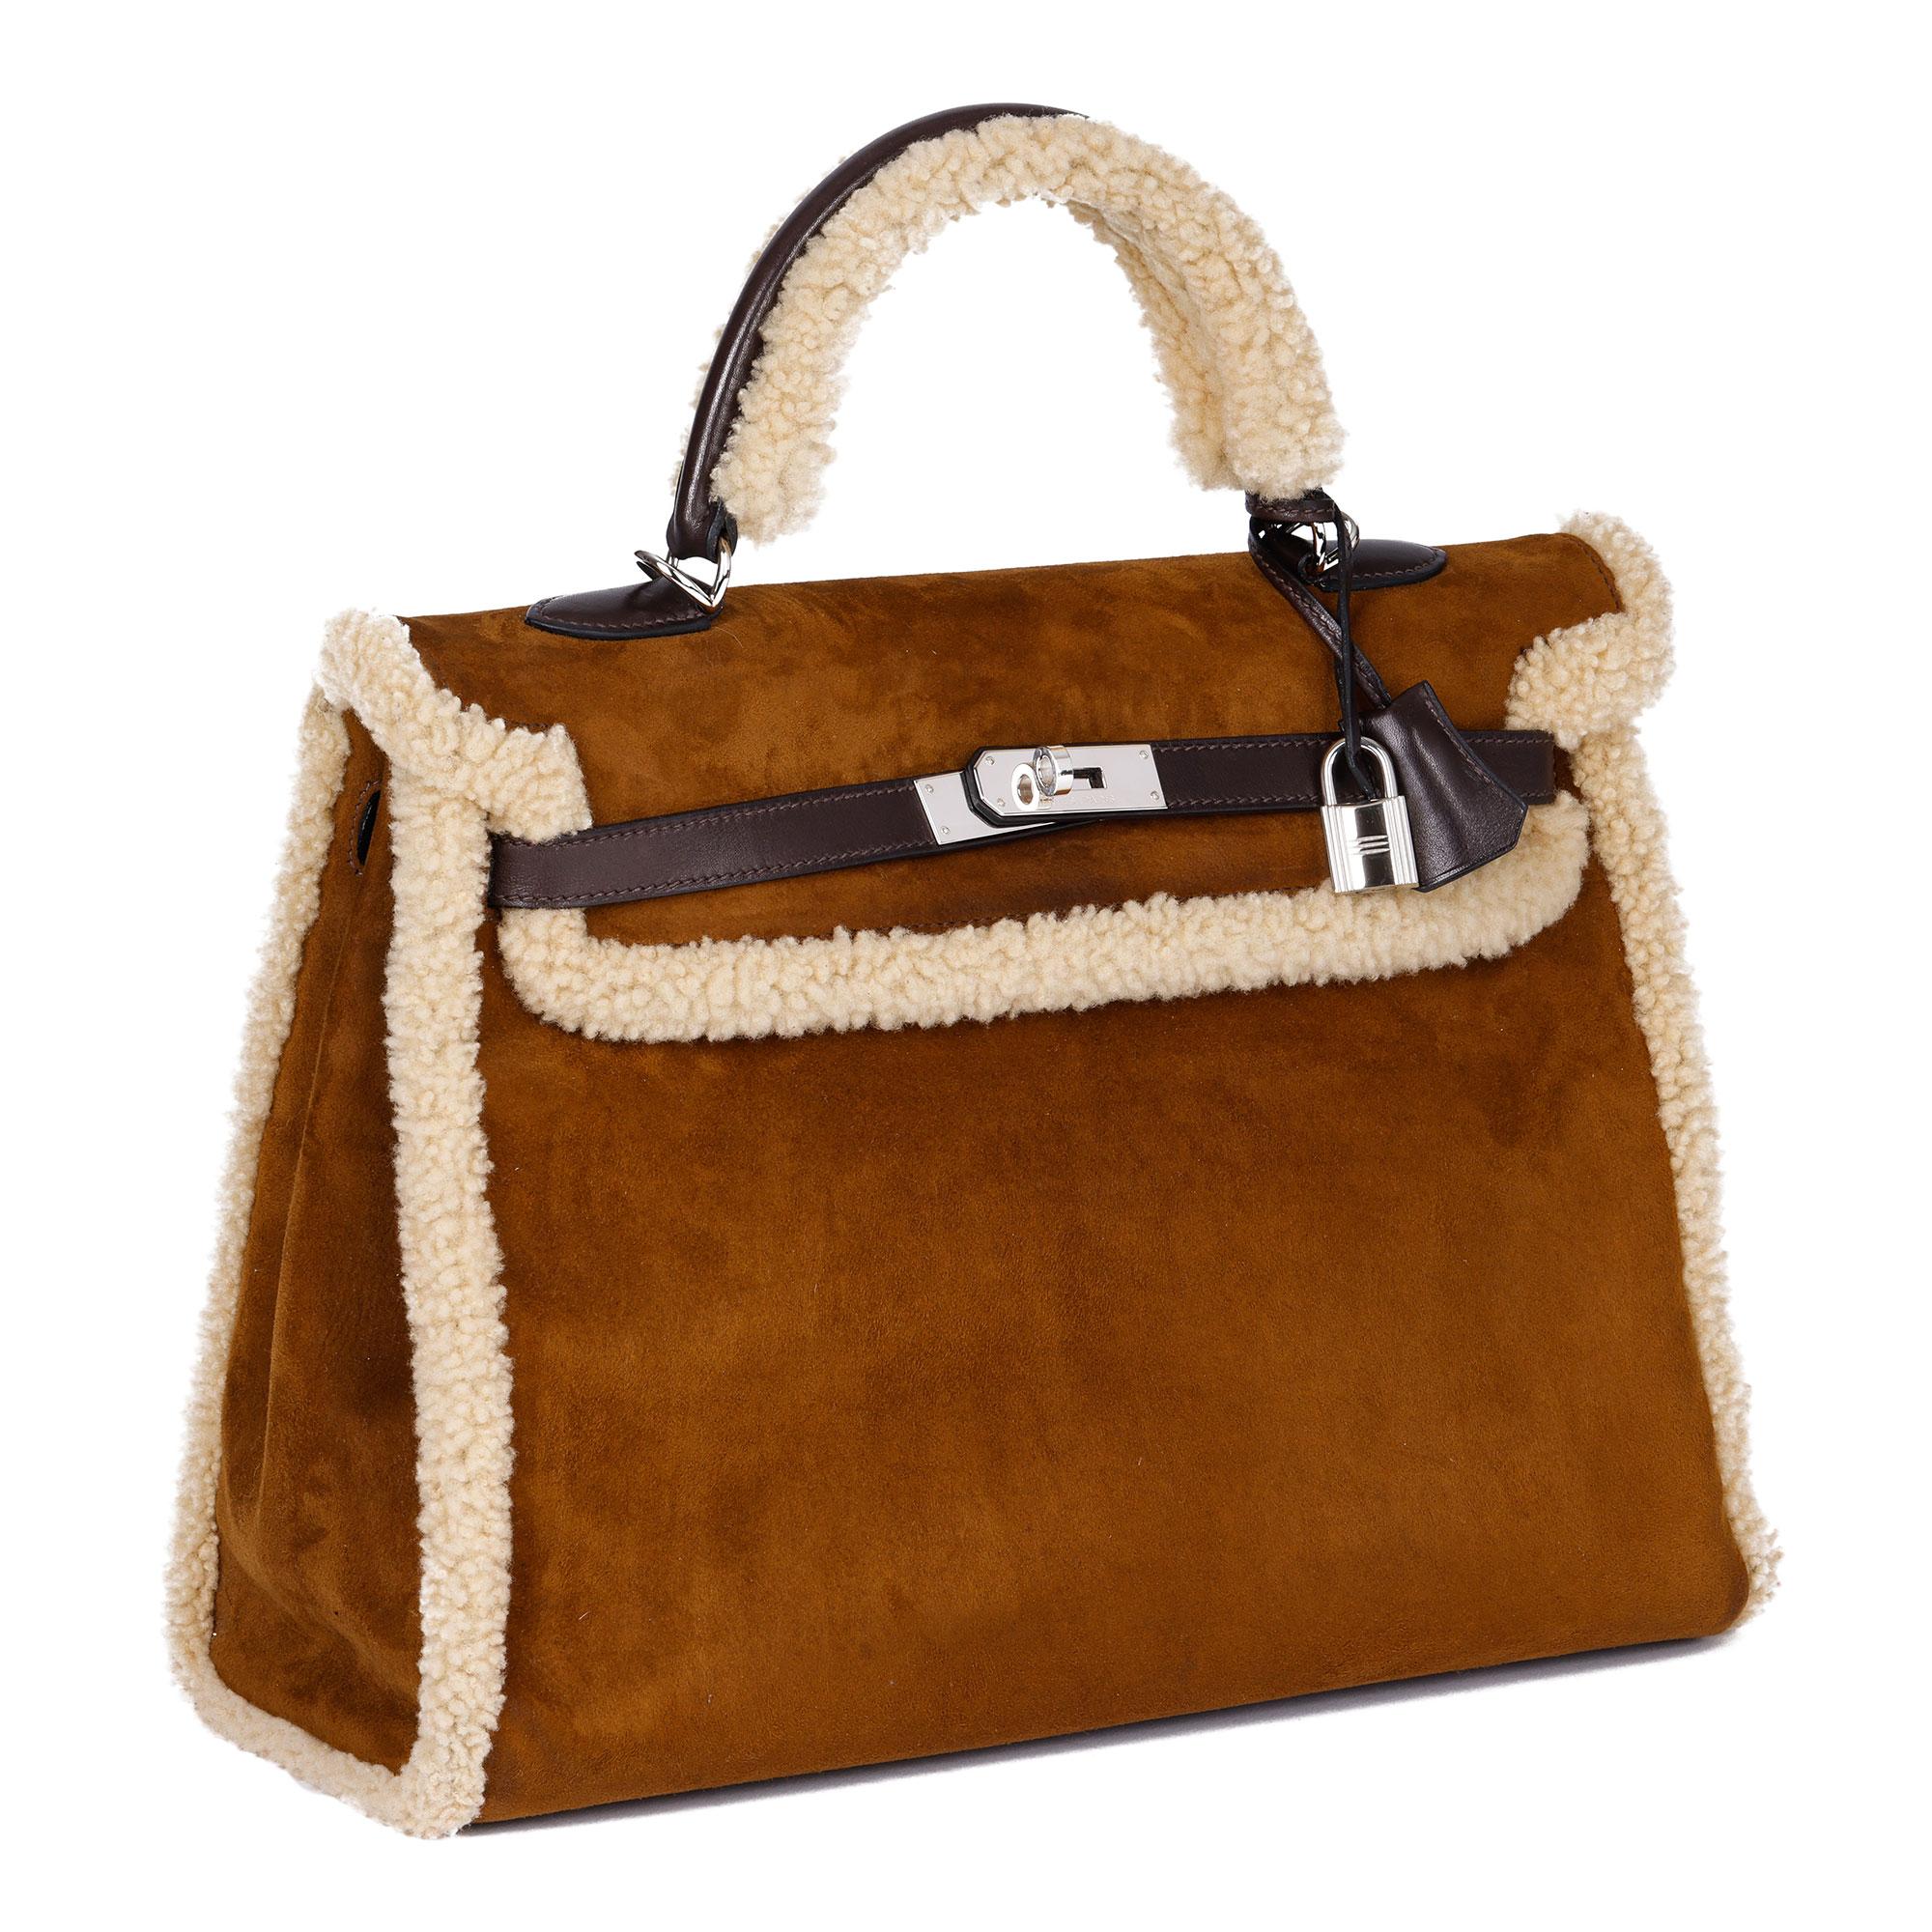 Hermès
Ebene Barenia & Shearling Teddy Kelly 35cm

Xupes Reference: JJLG054
Serial Number: [I]
Age (Circa): 2005
Accompanied By: Hermès Dust Bag, Box, Lock, Keys, Clochette, Shoulder Strap
Authenticity Details: Date Stamp (Made in France) 
Gender: